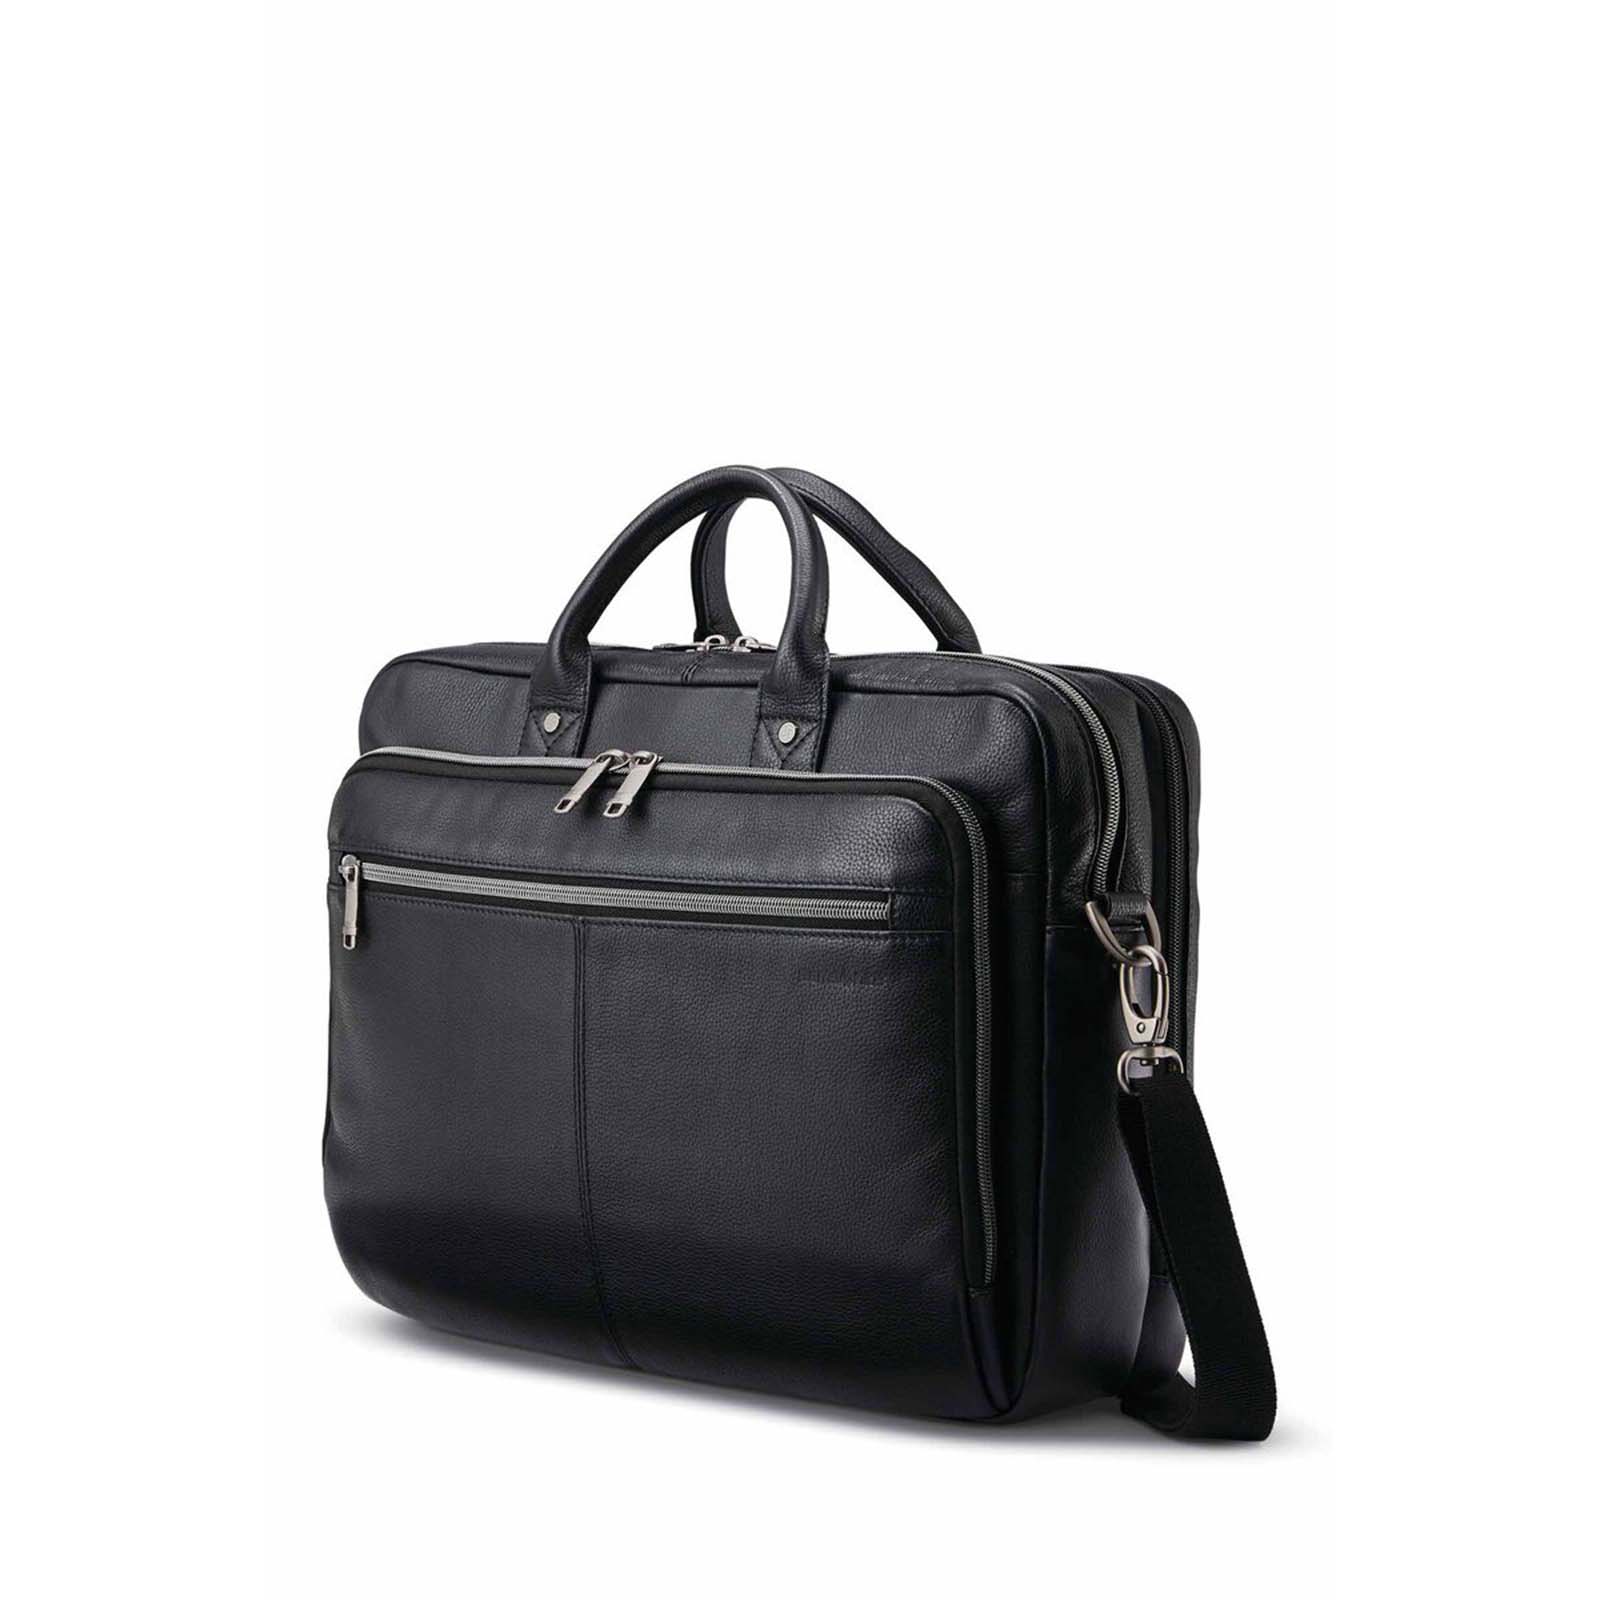 Samsonite-Classic-Leather-15-Inch-Top-Loader-Black-Front-Angle